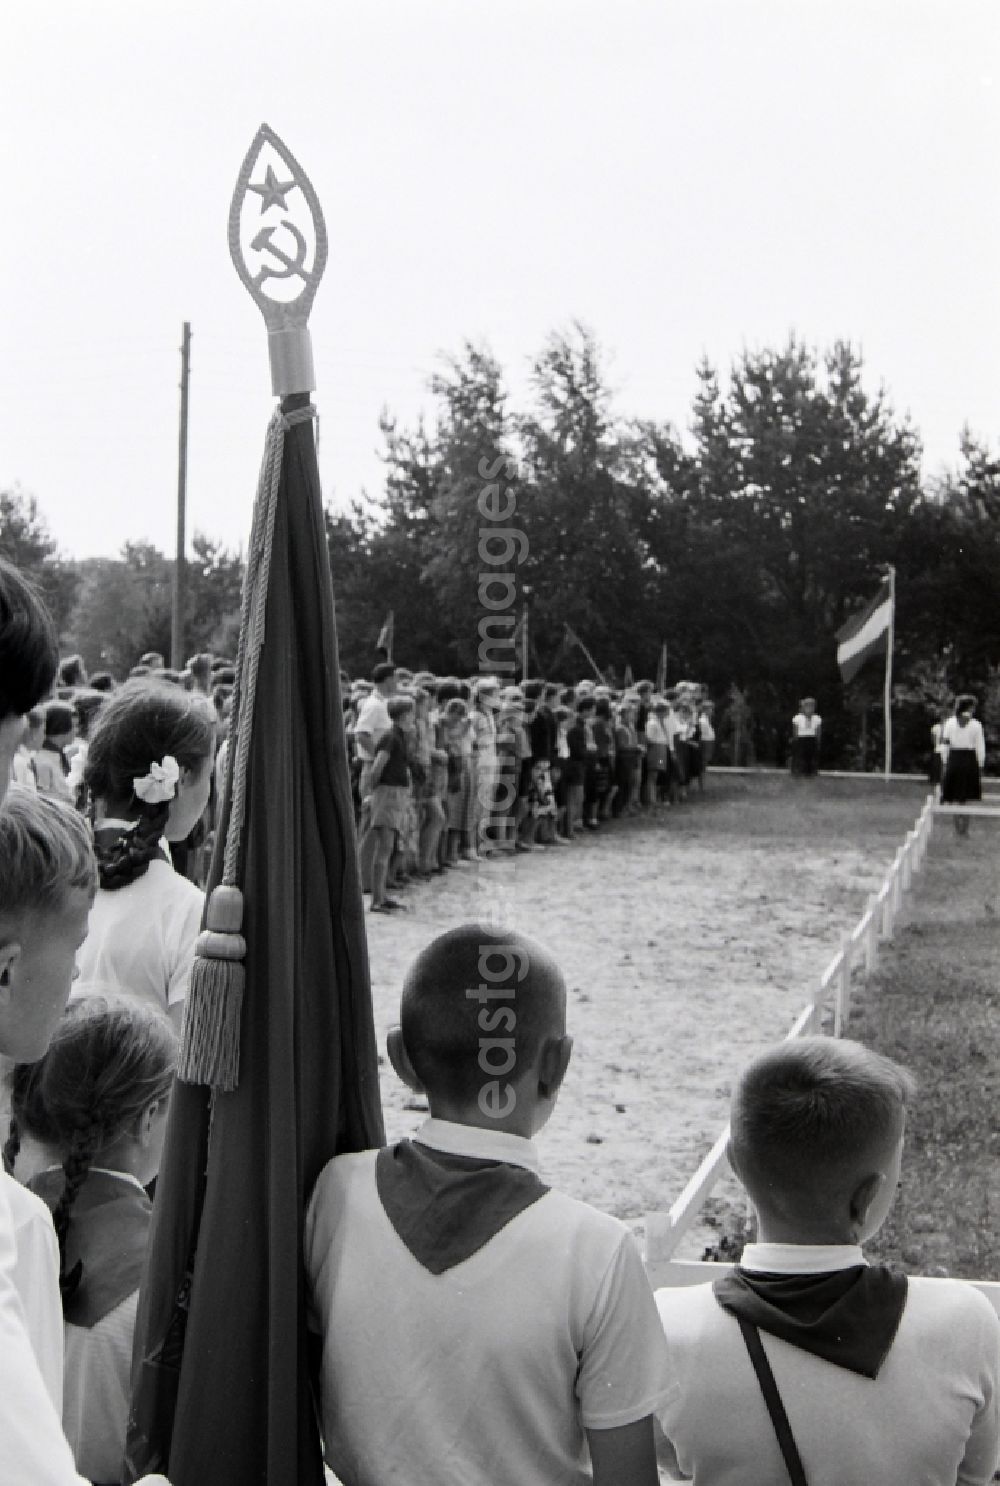 Prerow: Summer camp operation with pupils and teenagers in the summer camp Kim Ir Sen of the pioneer organization Ernst Thaelmann in Prerow in the state Mecklenburg-Western Pomerania on the territory of the former GDR, German Democratic Republic. With homemade phantasy uniforms and pre-military drill and ante-exercises, the communist tradition was commemorated in the Spanish Civil War